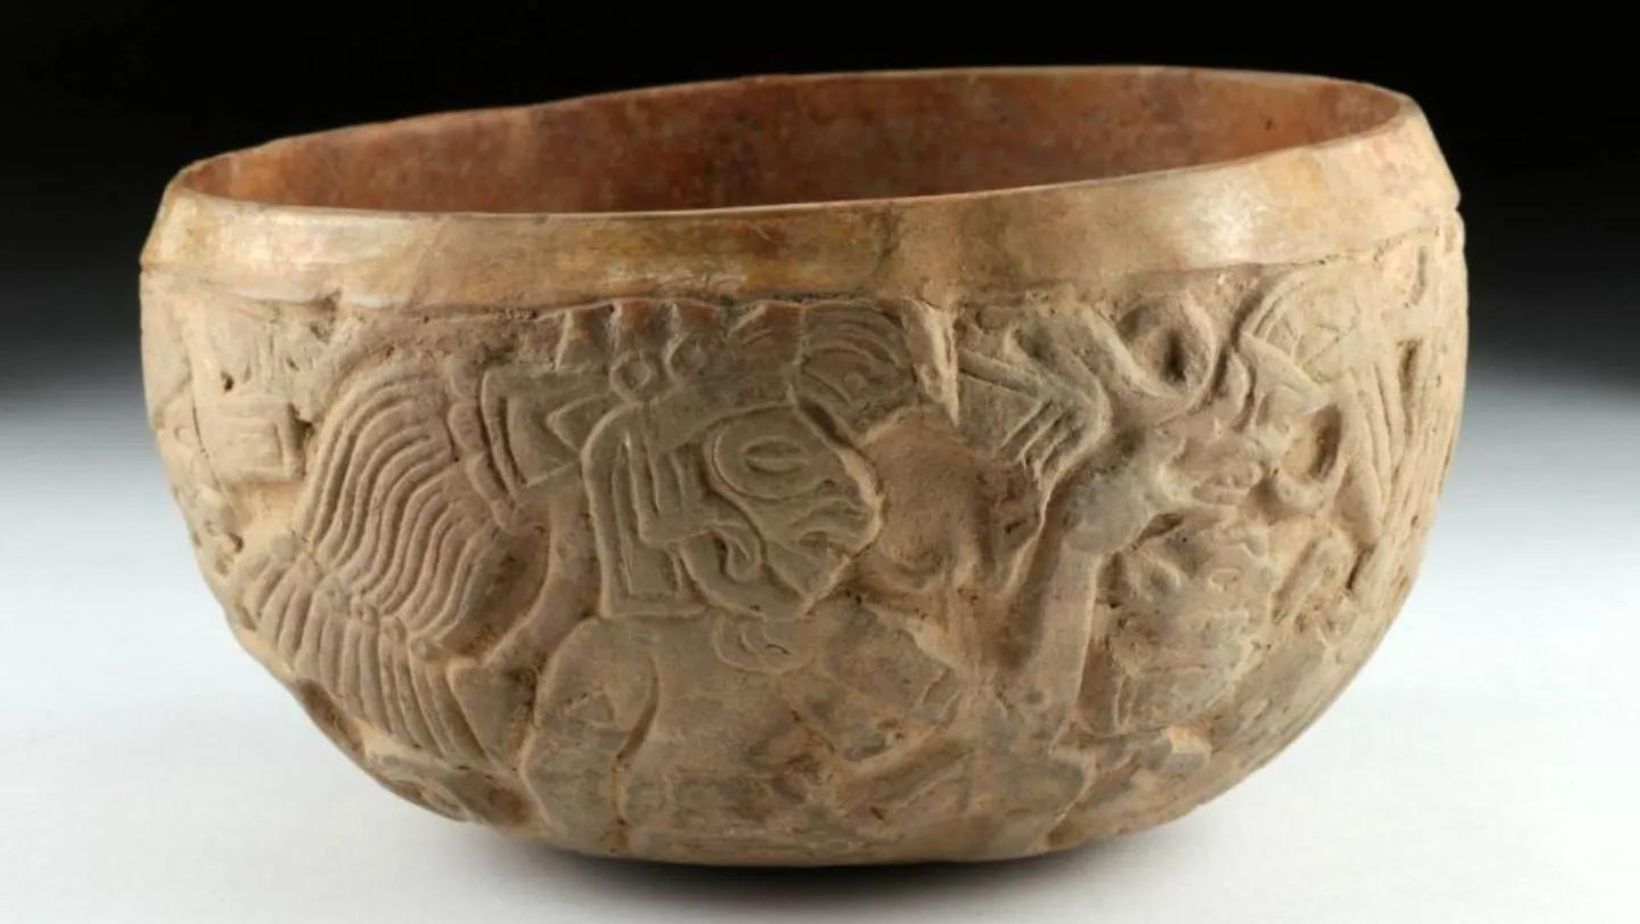 Ceramics and Pottery Art Forms of the Maya, main features of Mayan art and sculpture